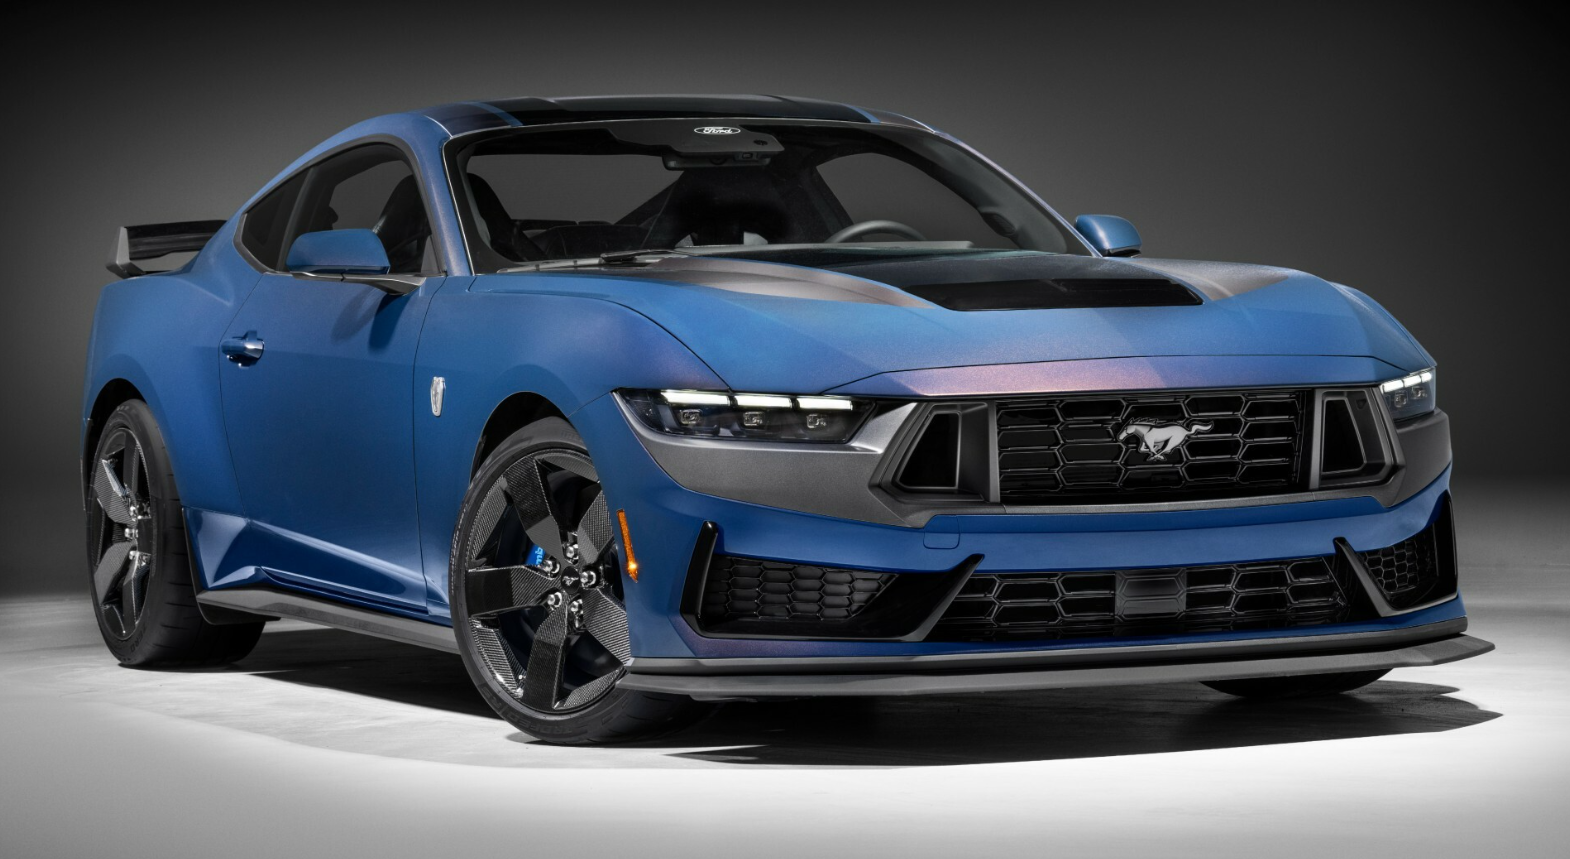 2025 Ford Mustang Ready For The Upcoming Launch - CarsJade.com